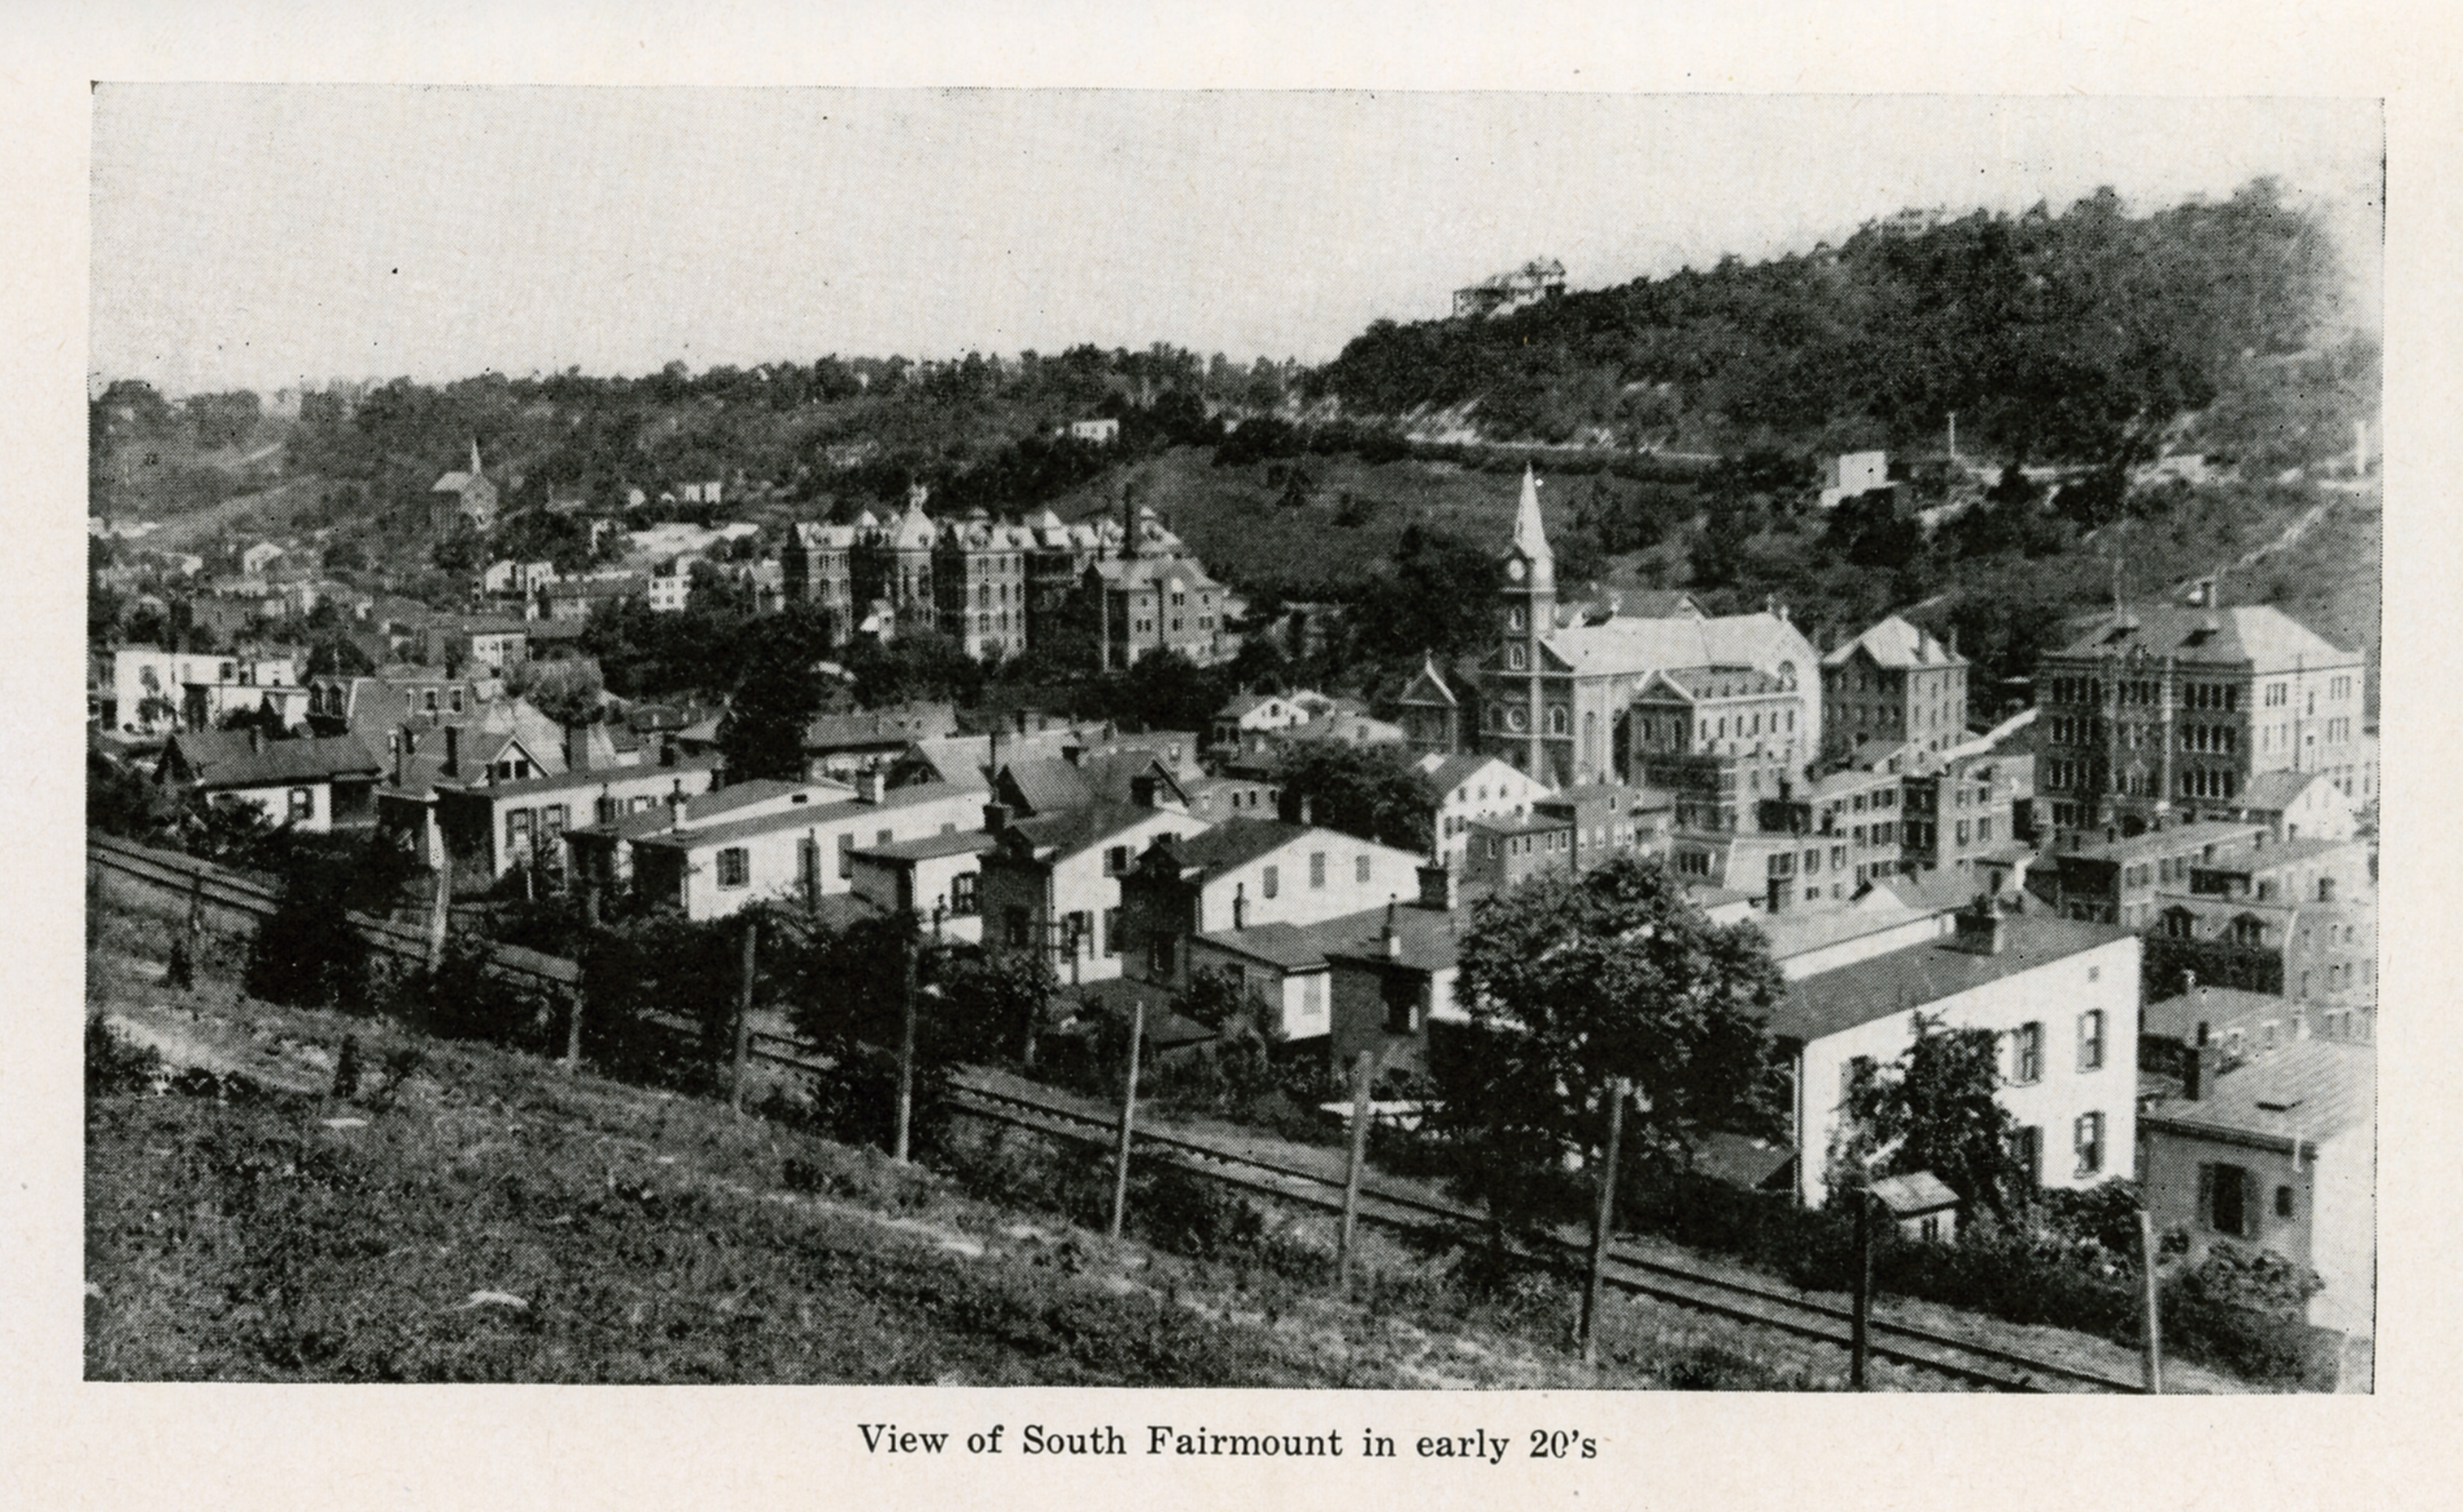 Photo of South Fairmount in the early 1920s